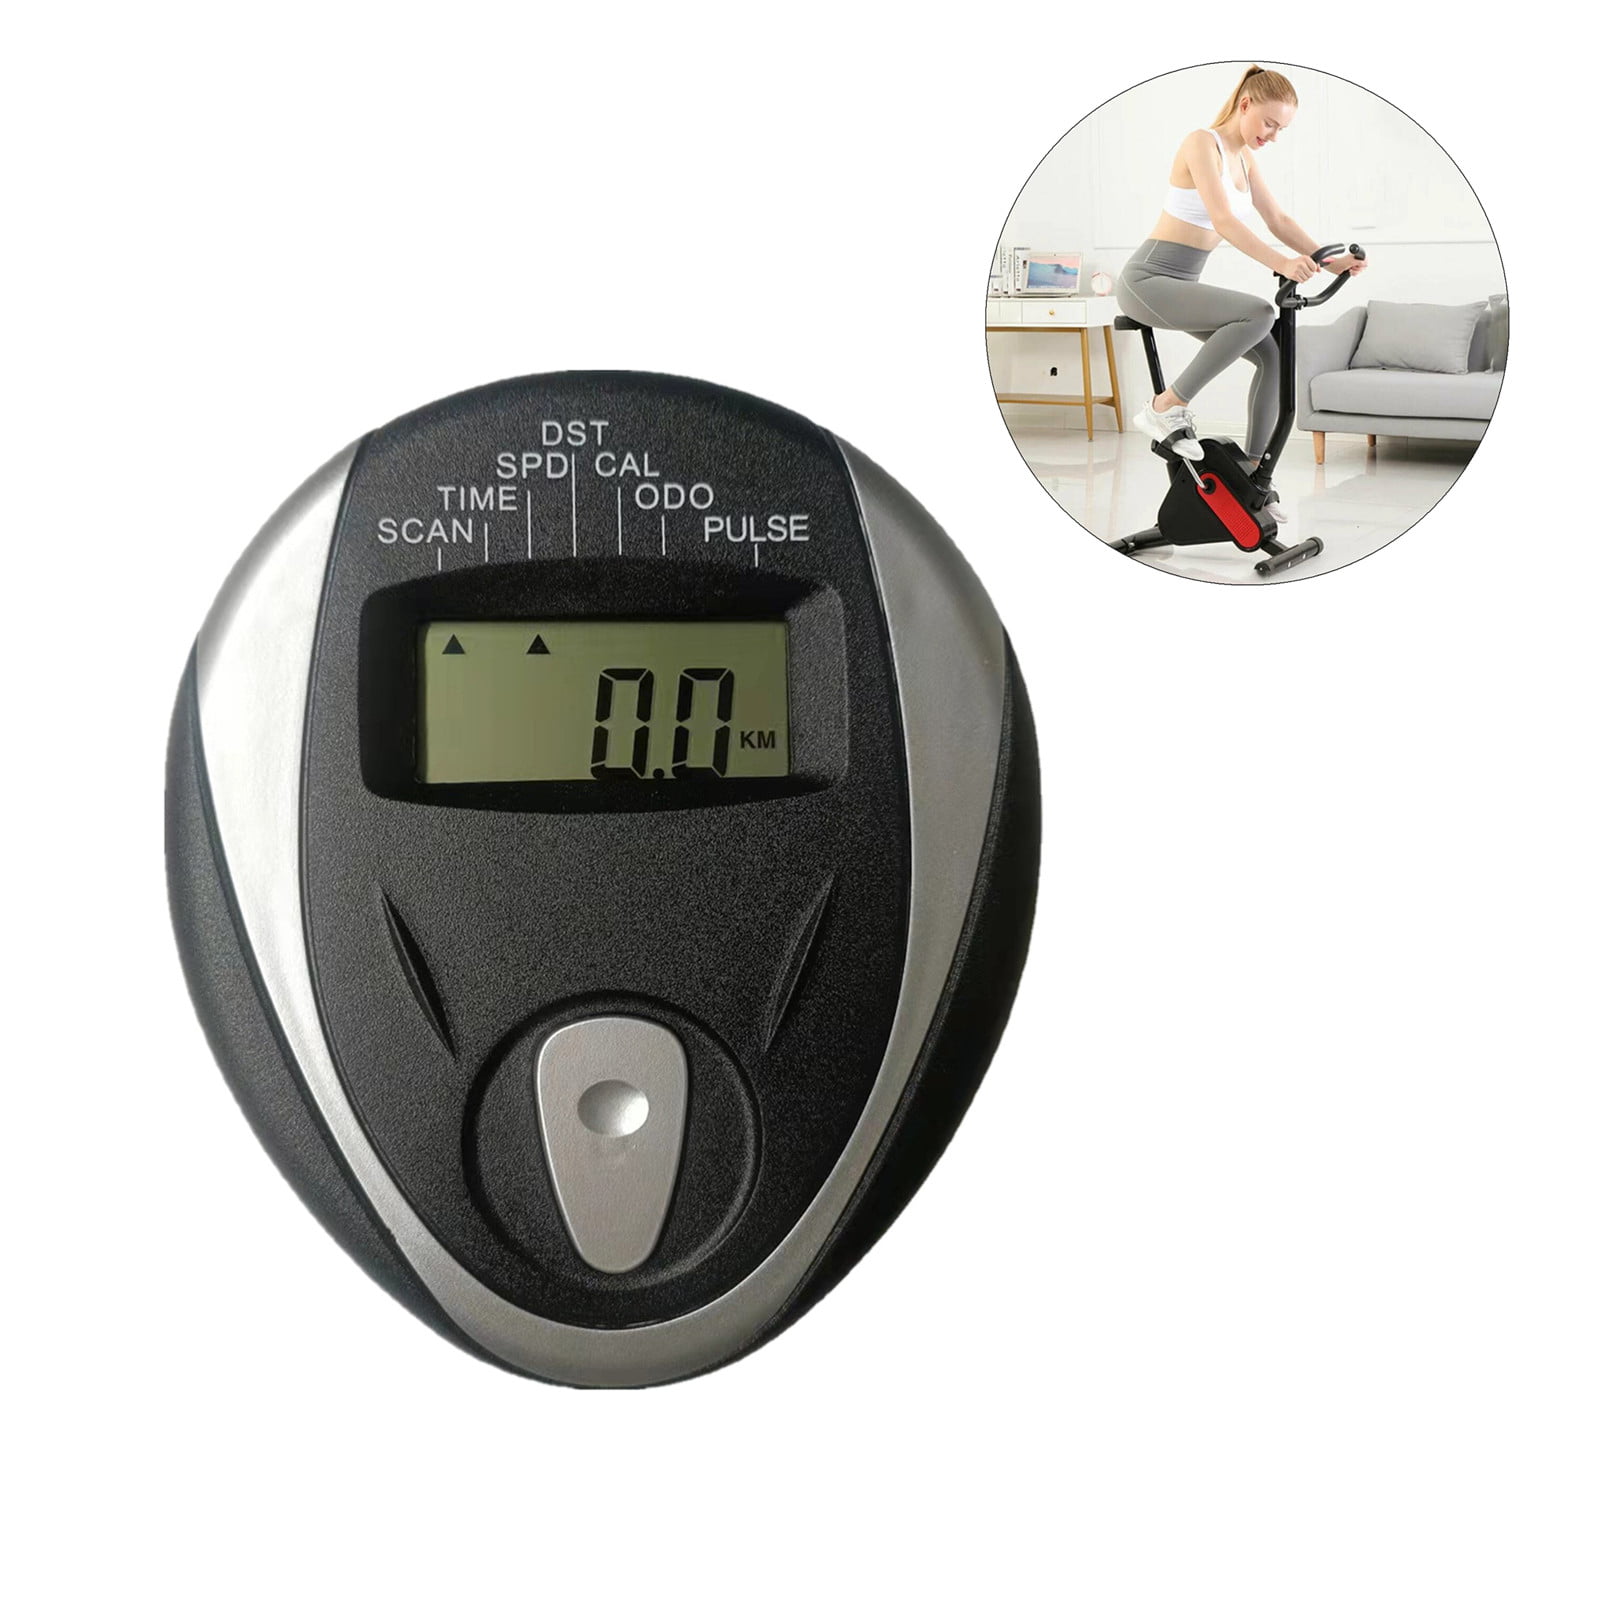 Replacement Monitor Speedometer LCD for Exercise Bike Stationary Bikes Computer 